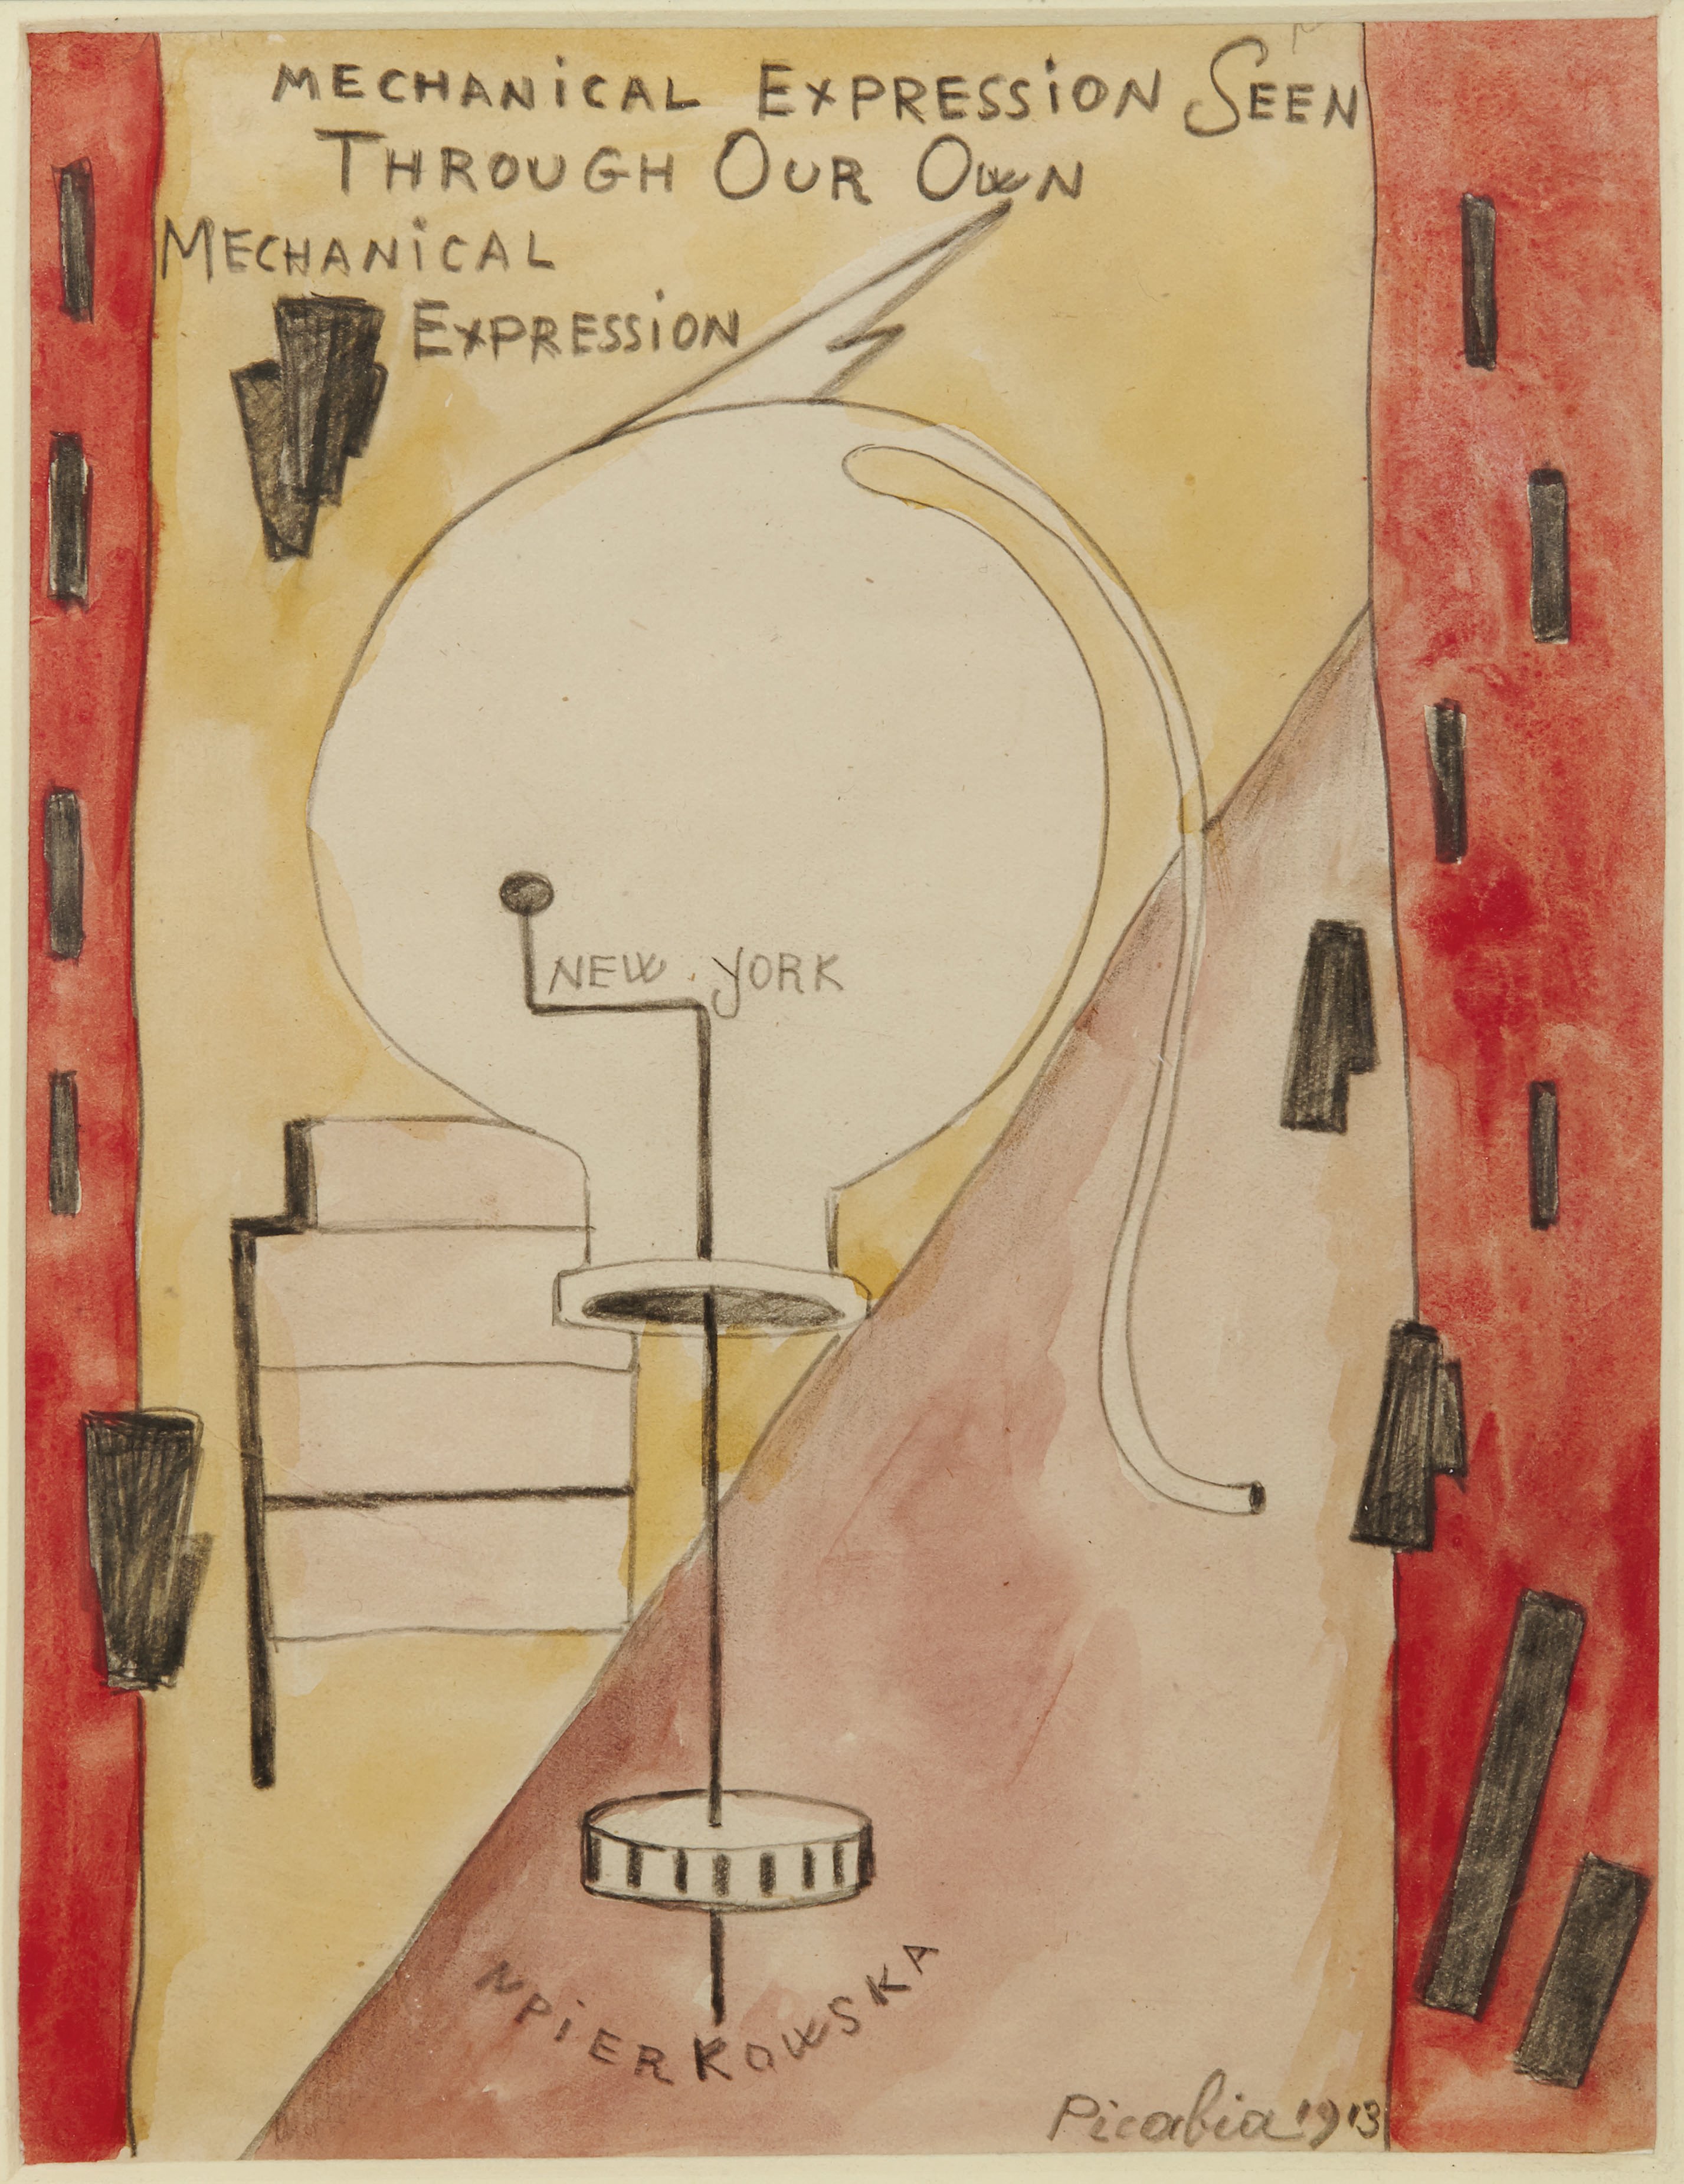 Francis Picabia, Mechanical expression seen through our own mechanical expression (1913). Estimate : €200.000-300.000. Photo: ©Christie’s Images Ltd, 2016.